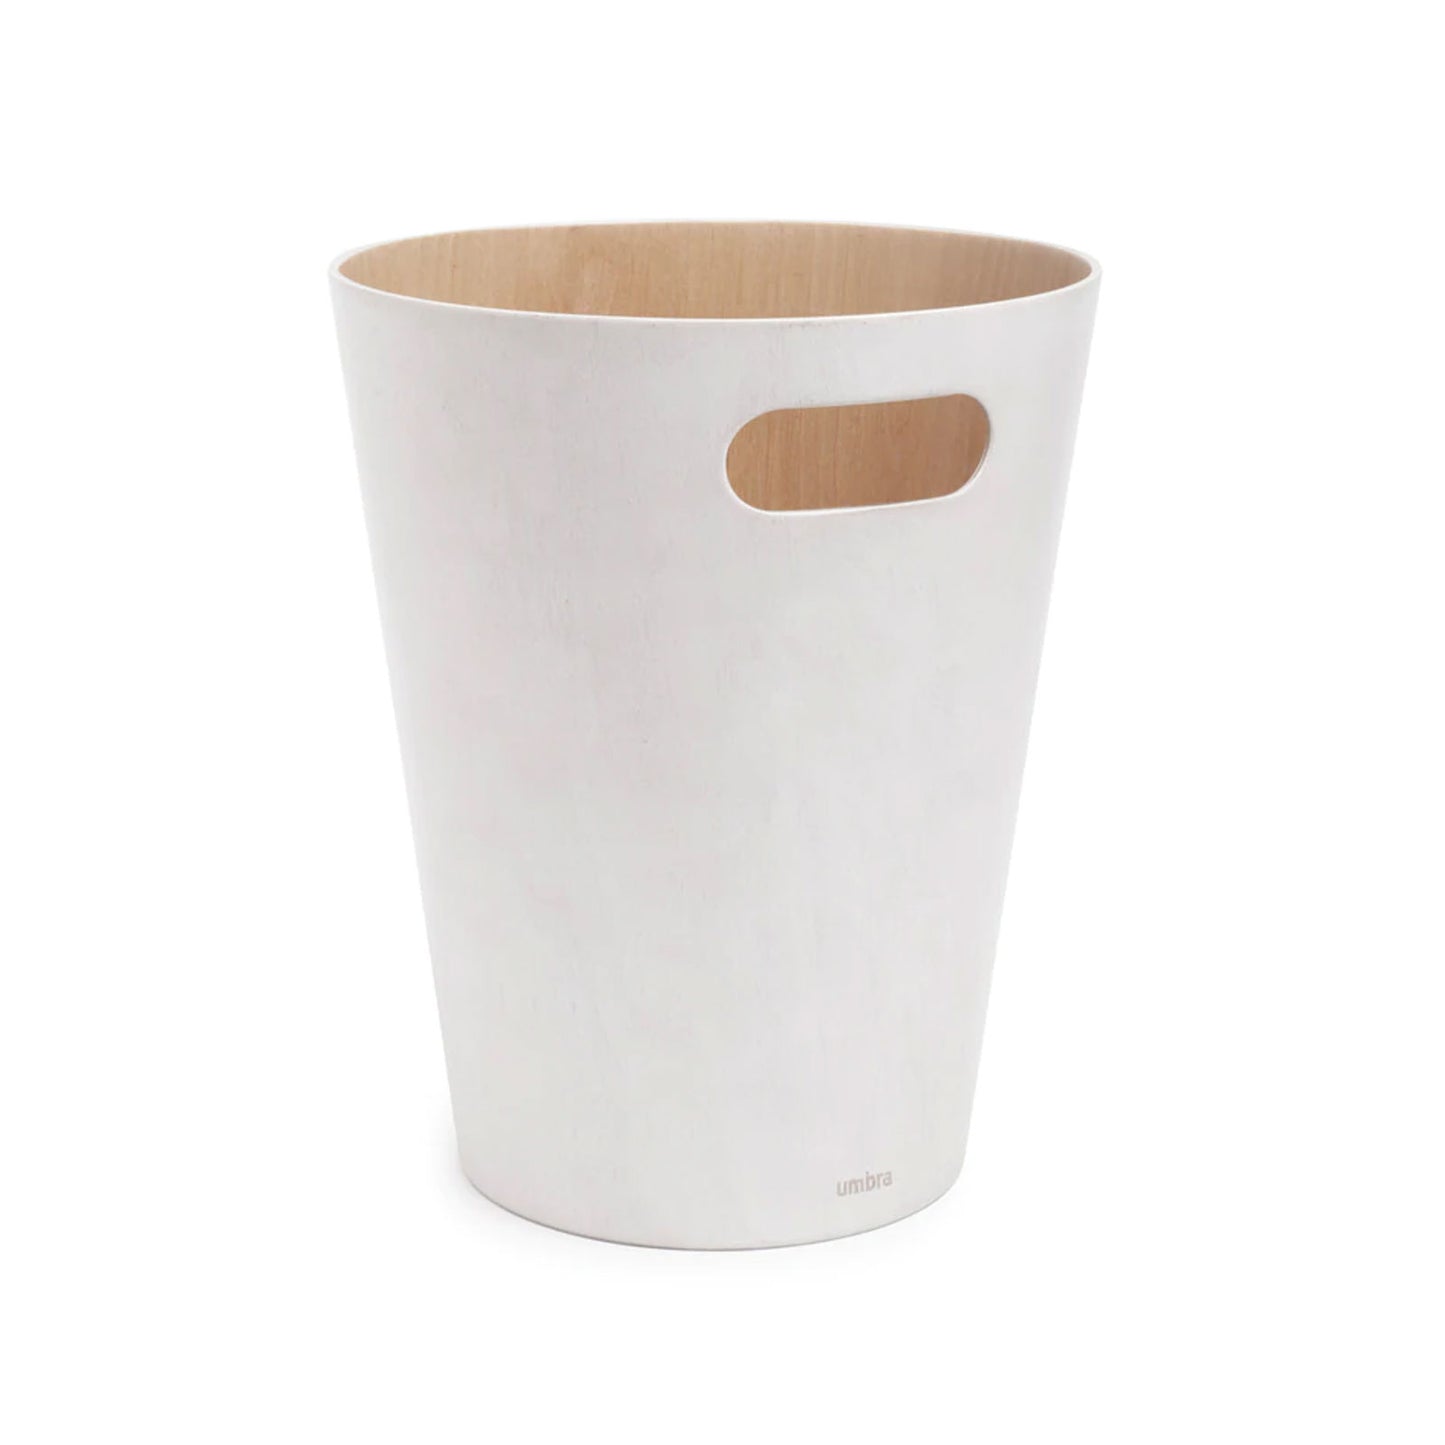 Woodrow Trash Can in White / Natural